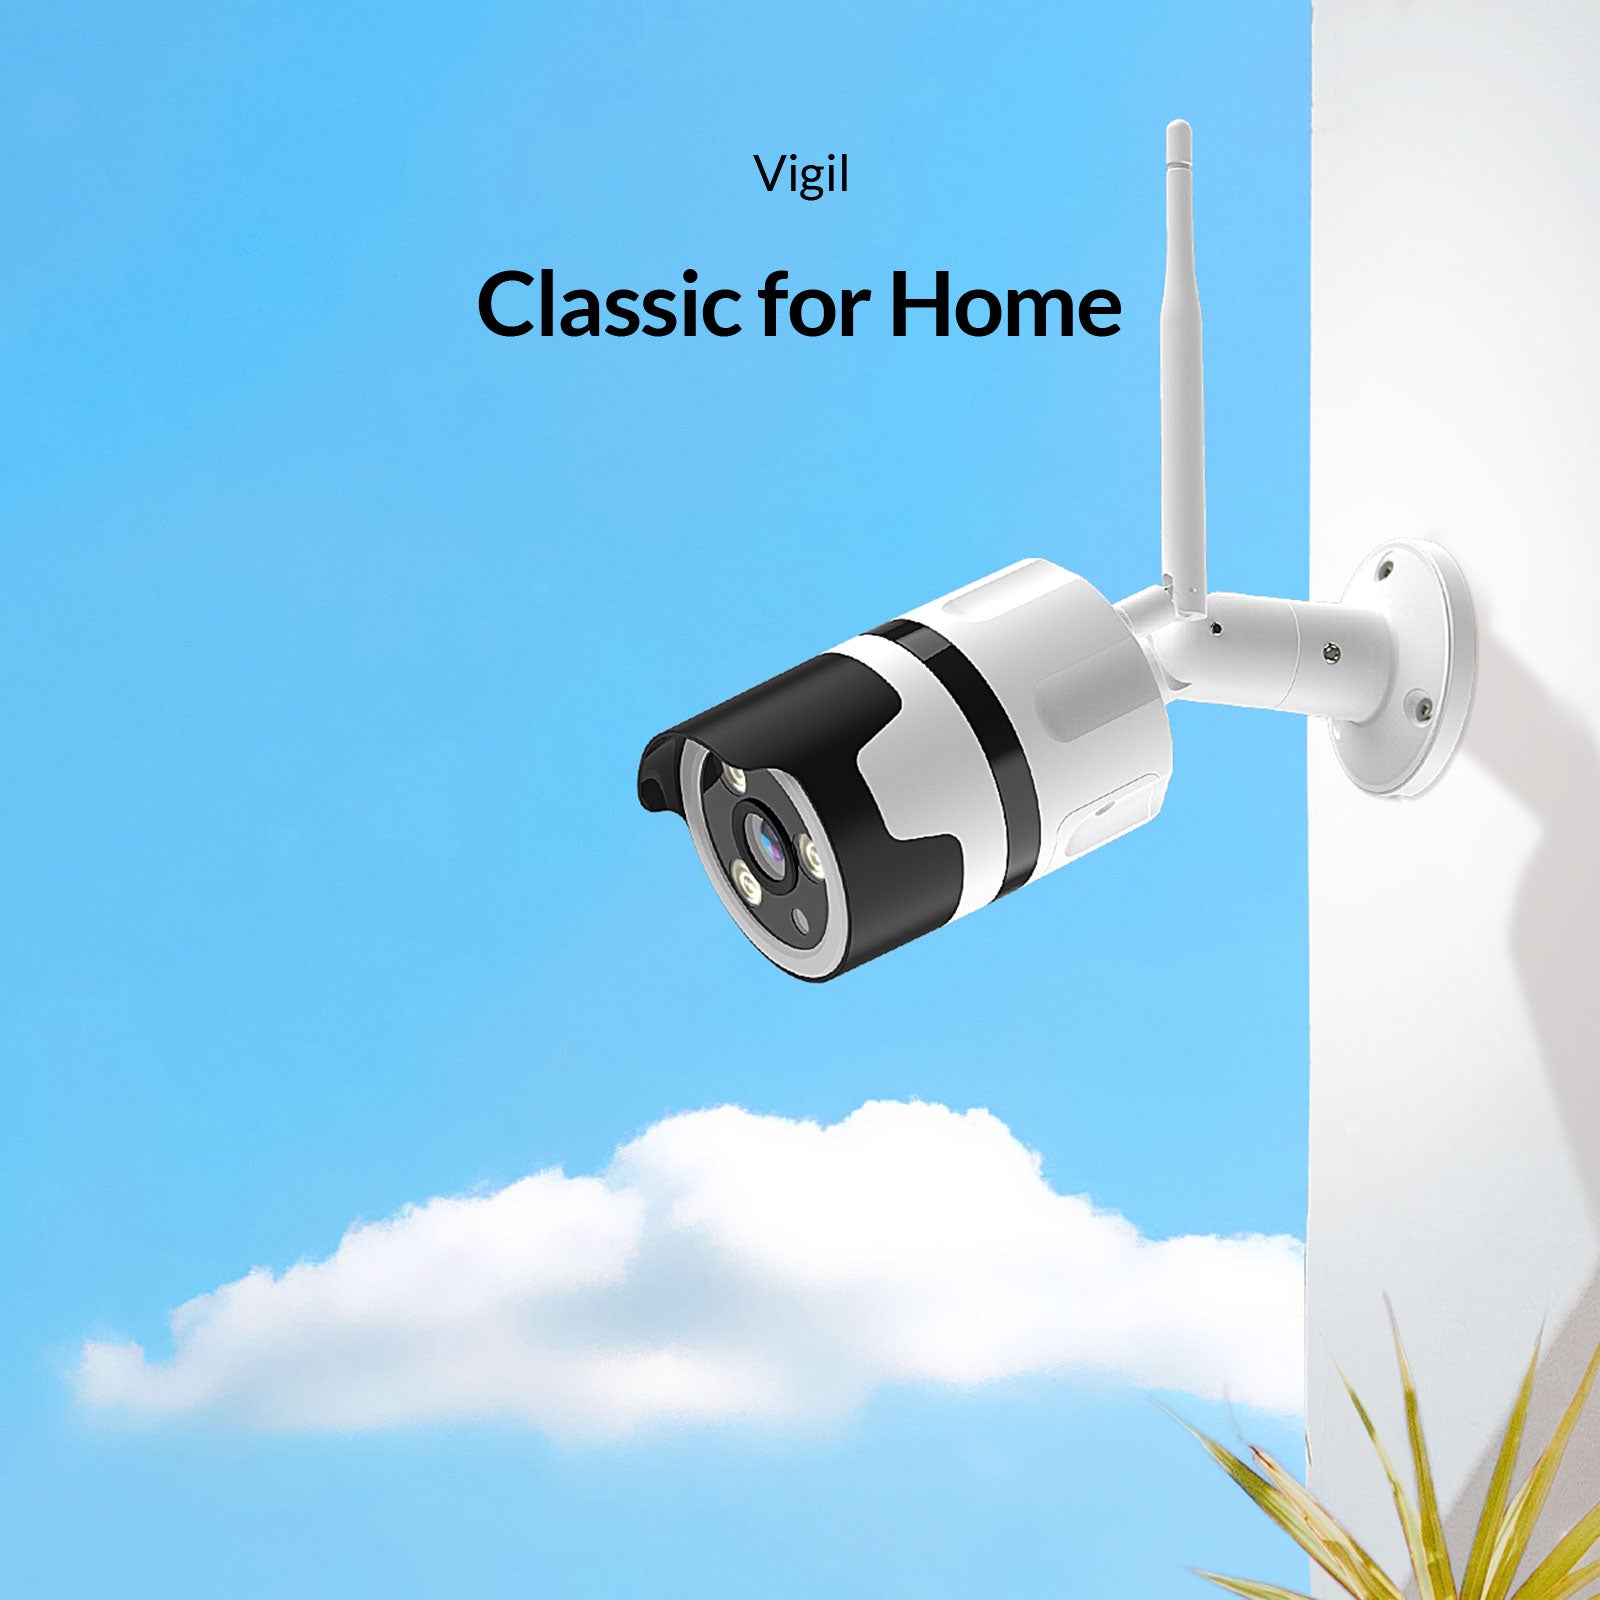 NETVUE Outdoor Security Camera - 1080P Security Camera Outdoor with Night  Vision